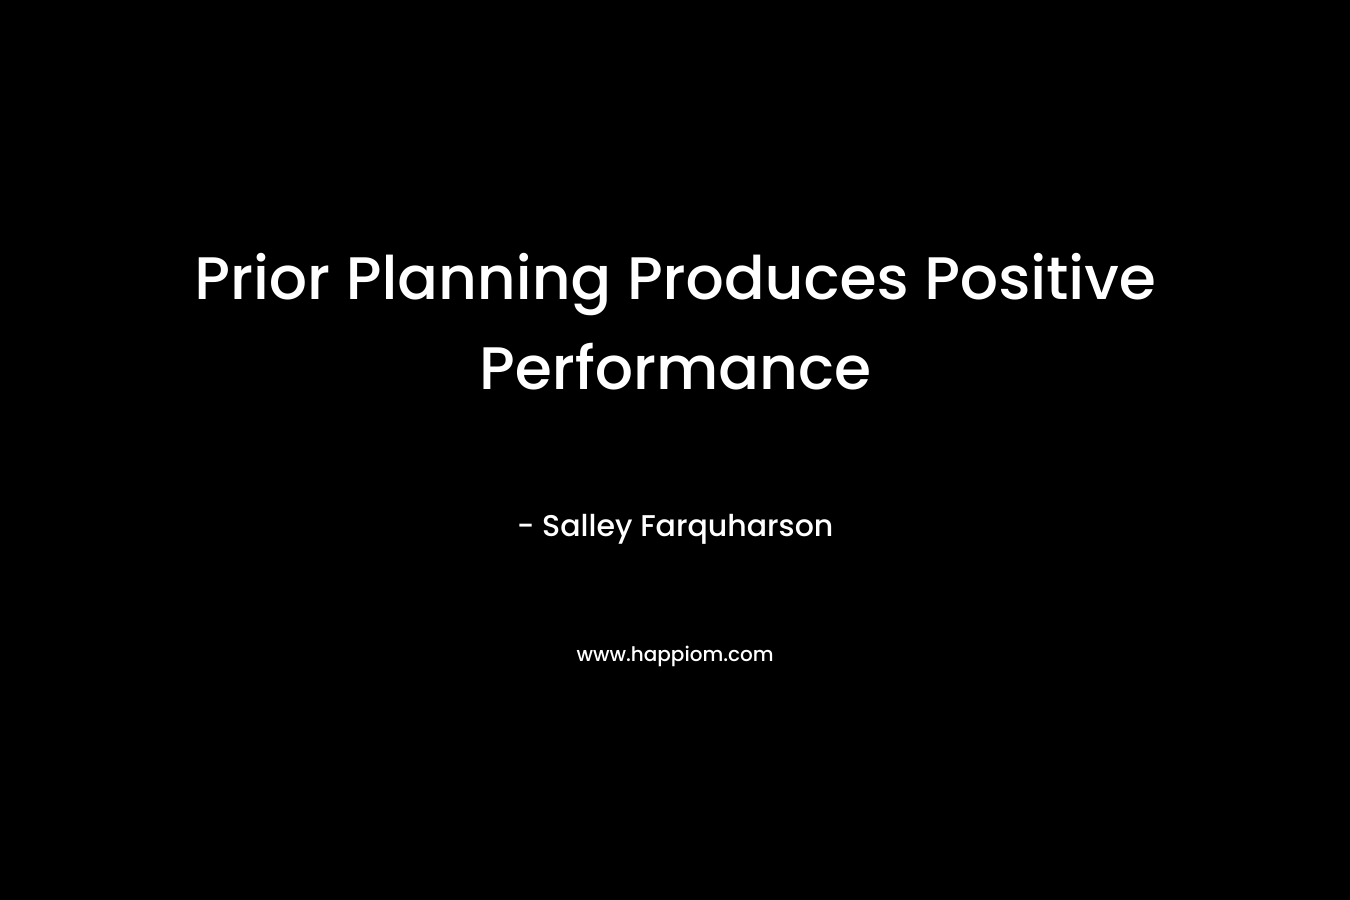 Prior Planning Produces Positive Performance